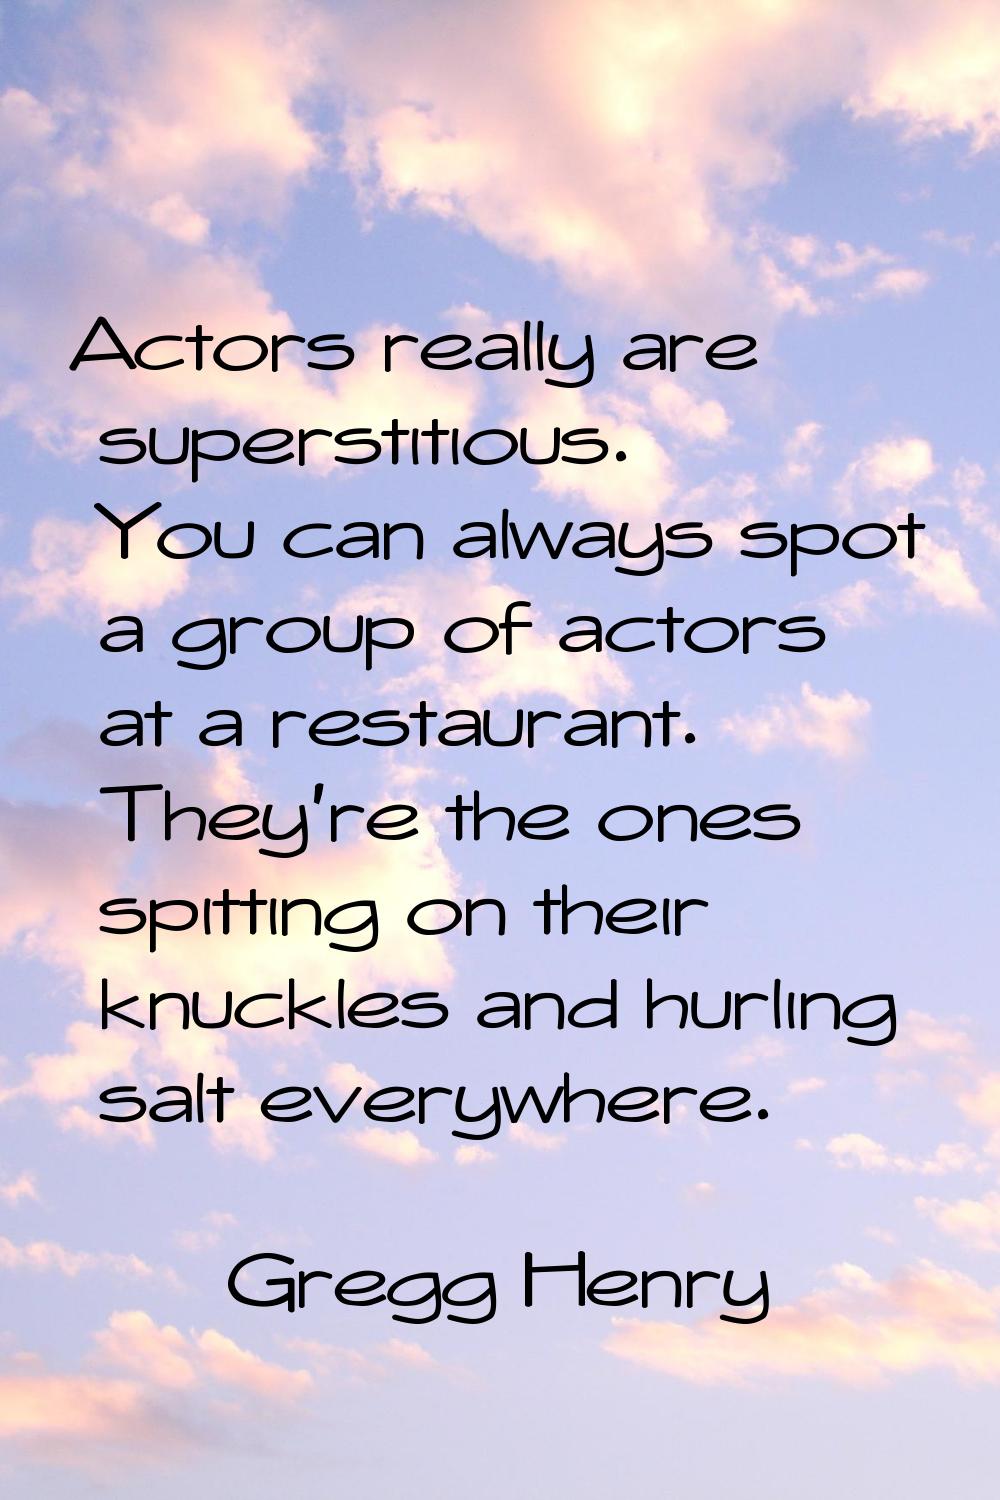 Actors really are superstitious. You can always spot a group of actors at a restaurant. They're the